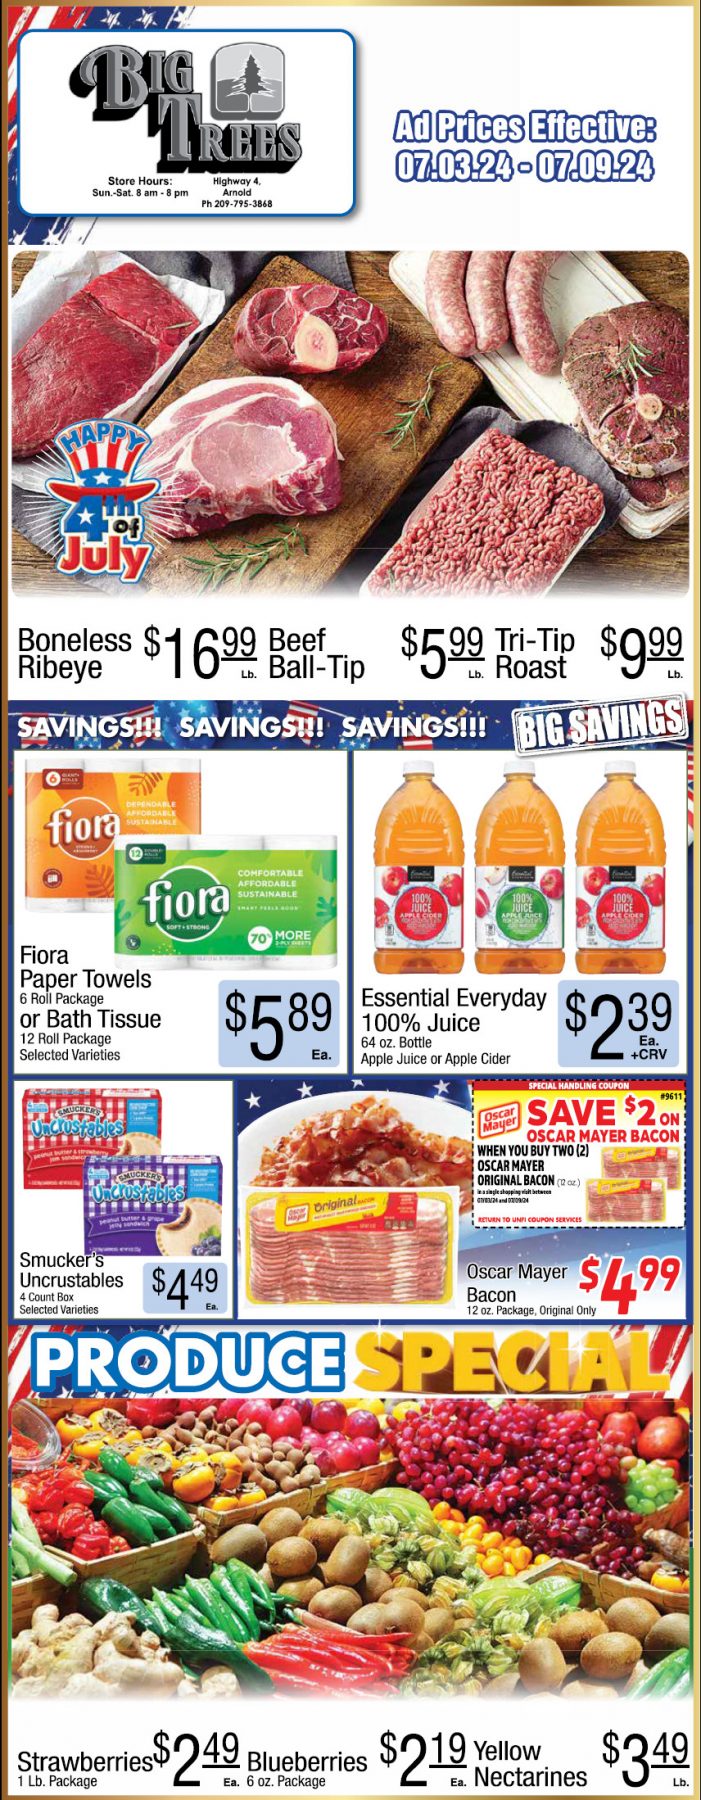 Big Trees Market Weekly Ad, Grocery, Produce, Meat & Deli Specials Through July 9th! Shop Local & Save!